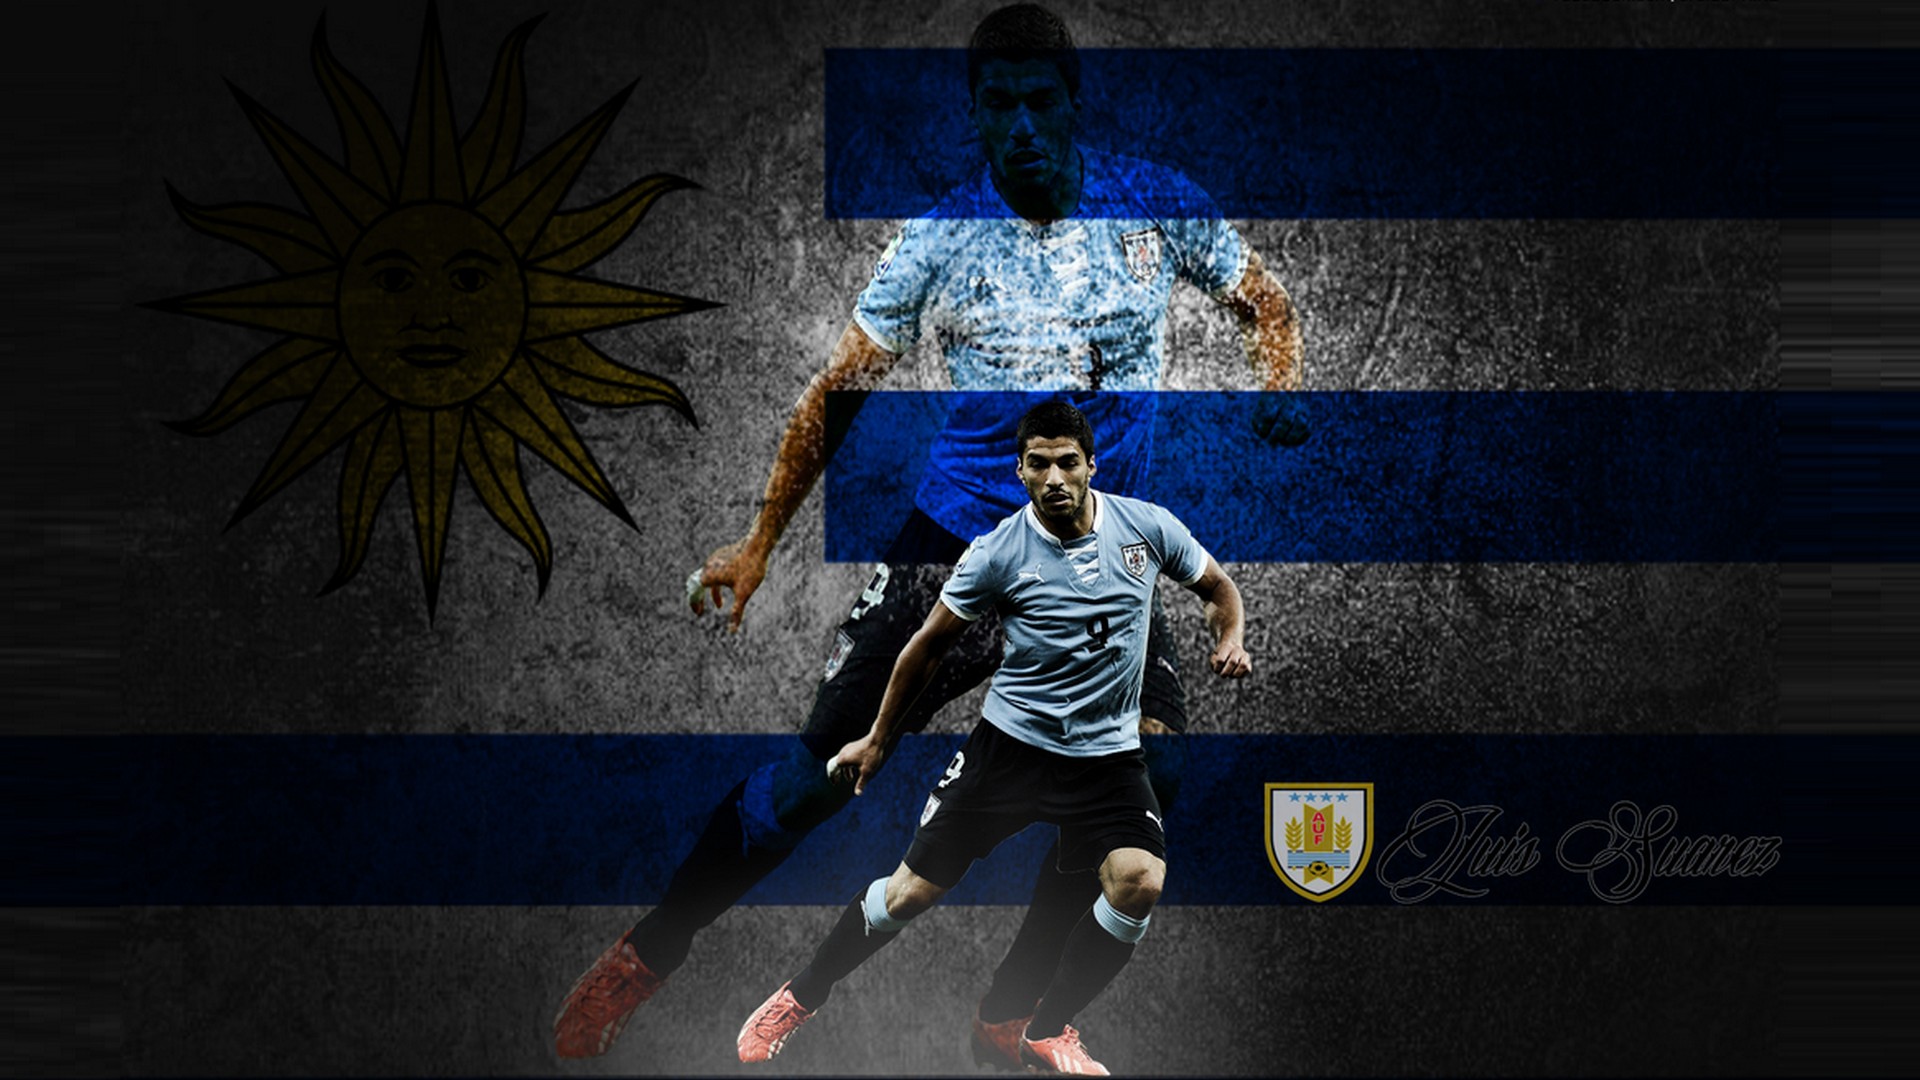 Luis Suarez Uruguay Wallpaper For Desktop with image resolution 1920x1080 pixel. You can use this wallpaper as background for your desktop Computer Screensavers, Android or iPhone smartphones